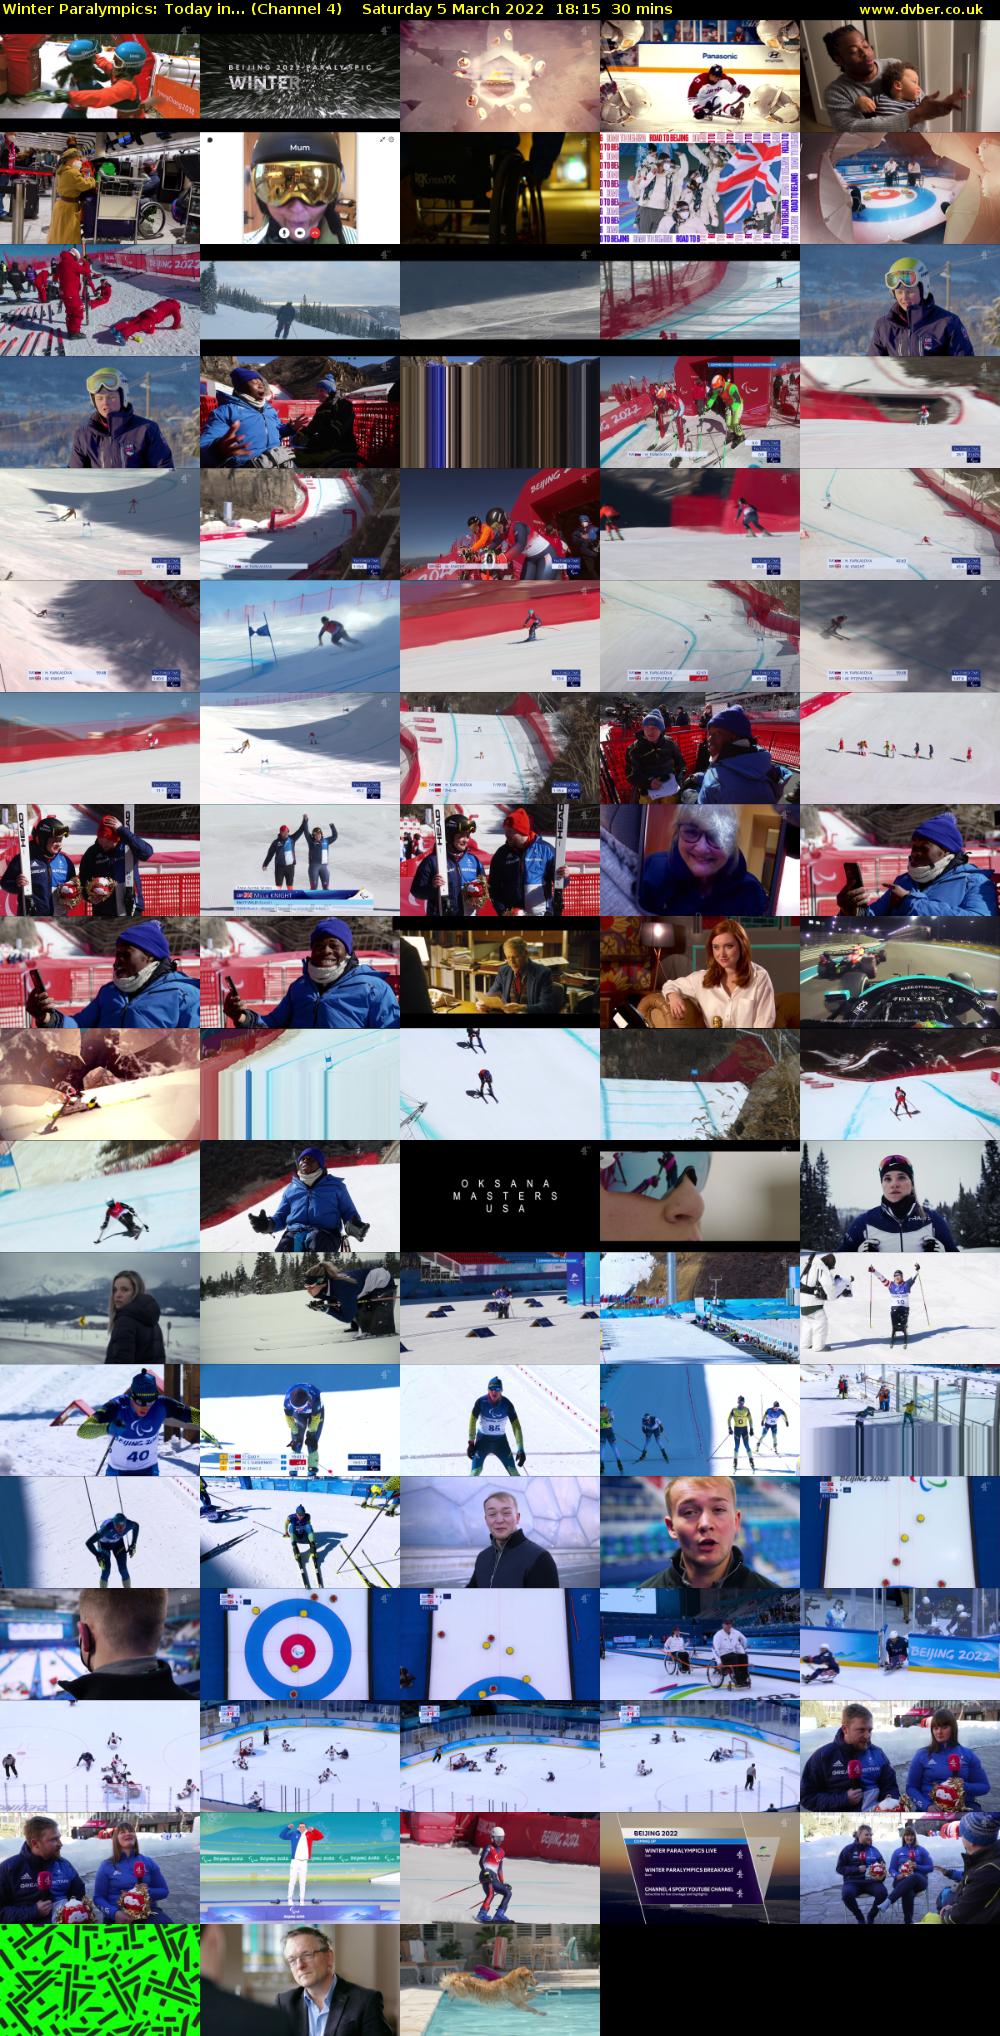 Winter Paralympics: Today in... (Channel 4) Saturday 5 March 2022 18:15 - 18:45